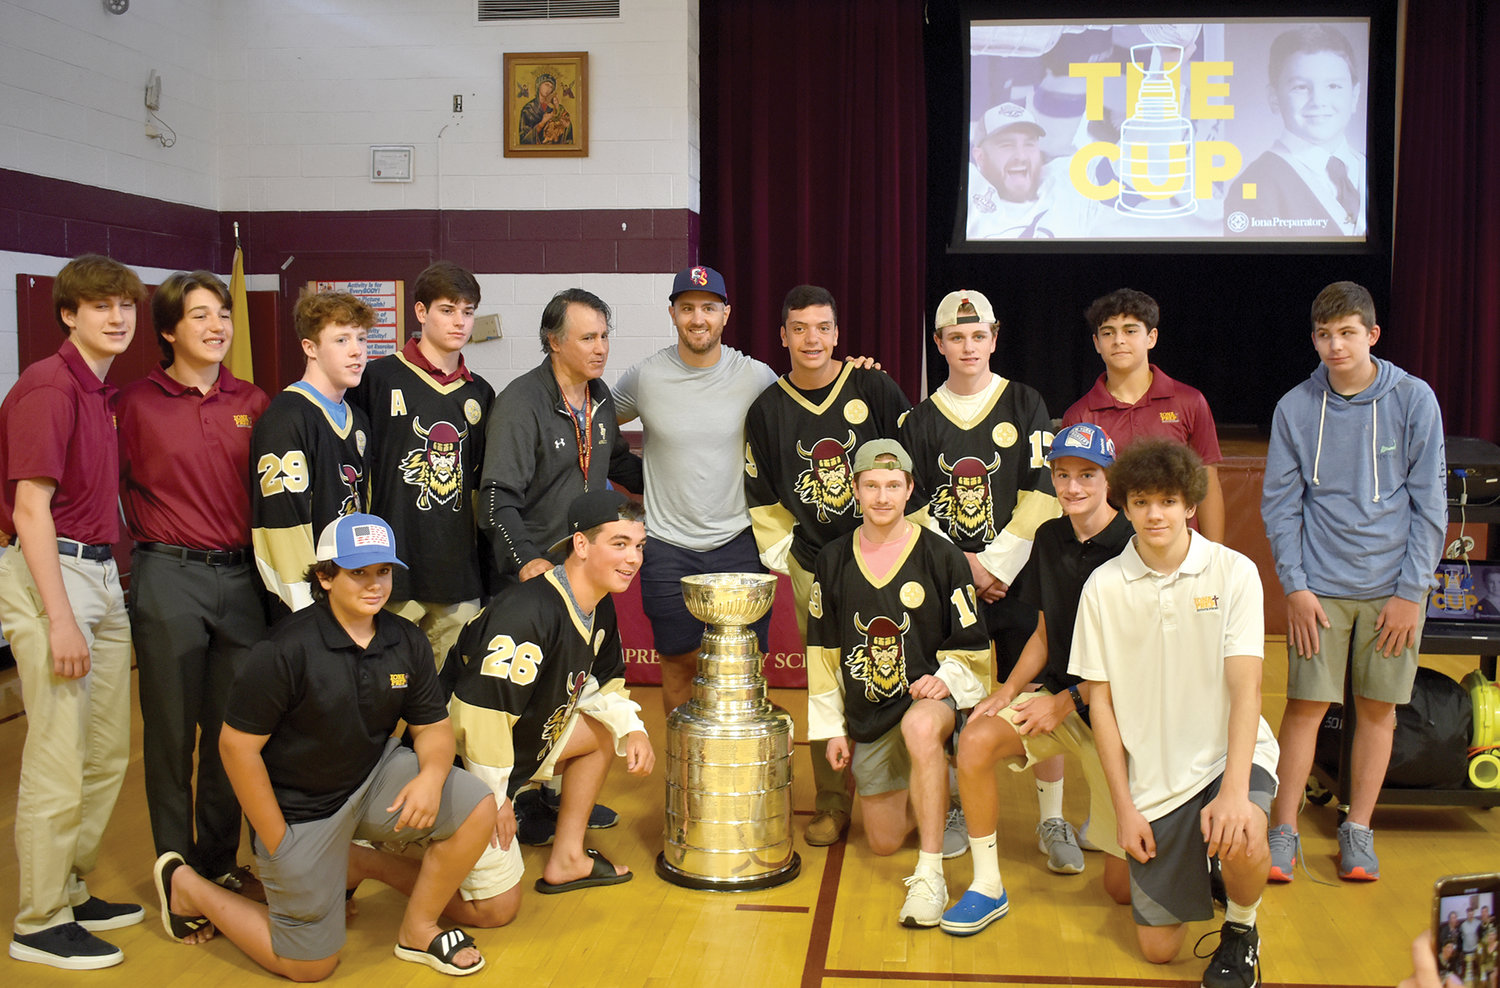 Kevin Shattenkirk, center, joins members of the hockey program during his visit to Iona Prep’s Lower School in New Rochelle with the NHL’s Stanley Cup July 17. Shattenkirk, a graduate of Iona Prep’s Lower School and now a member of the Anaheim Ducks, was a member of the 2020 Stanley Cup champion Tampa Bay Lightning.